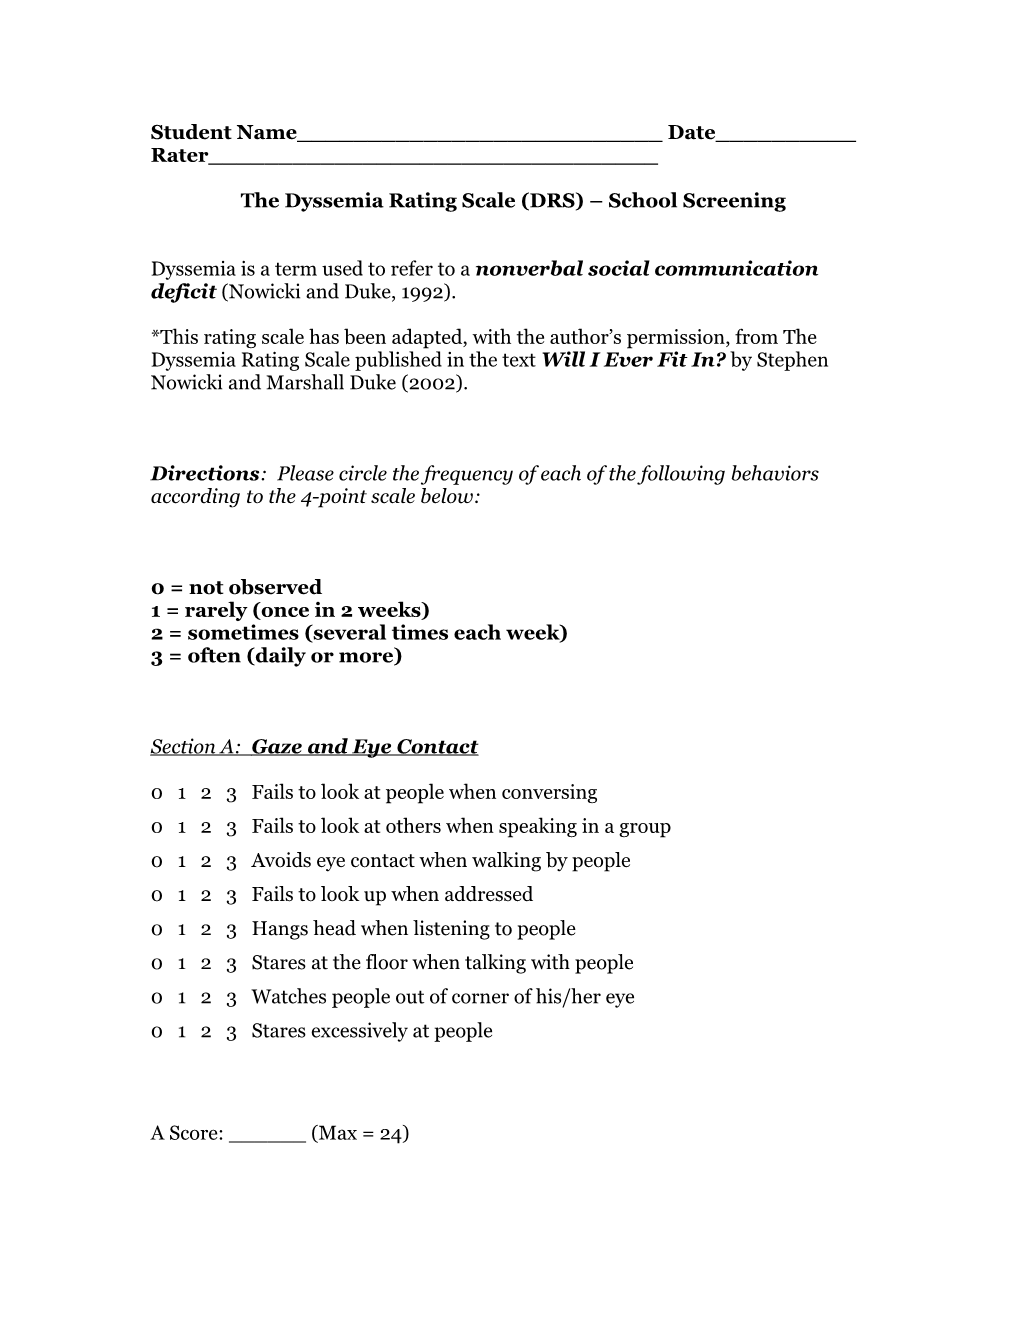 The Dyssemia Rating Scale (DRS) School Screening